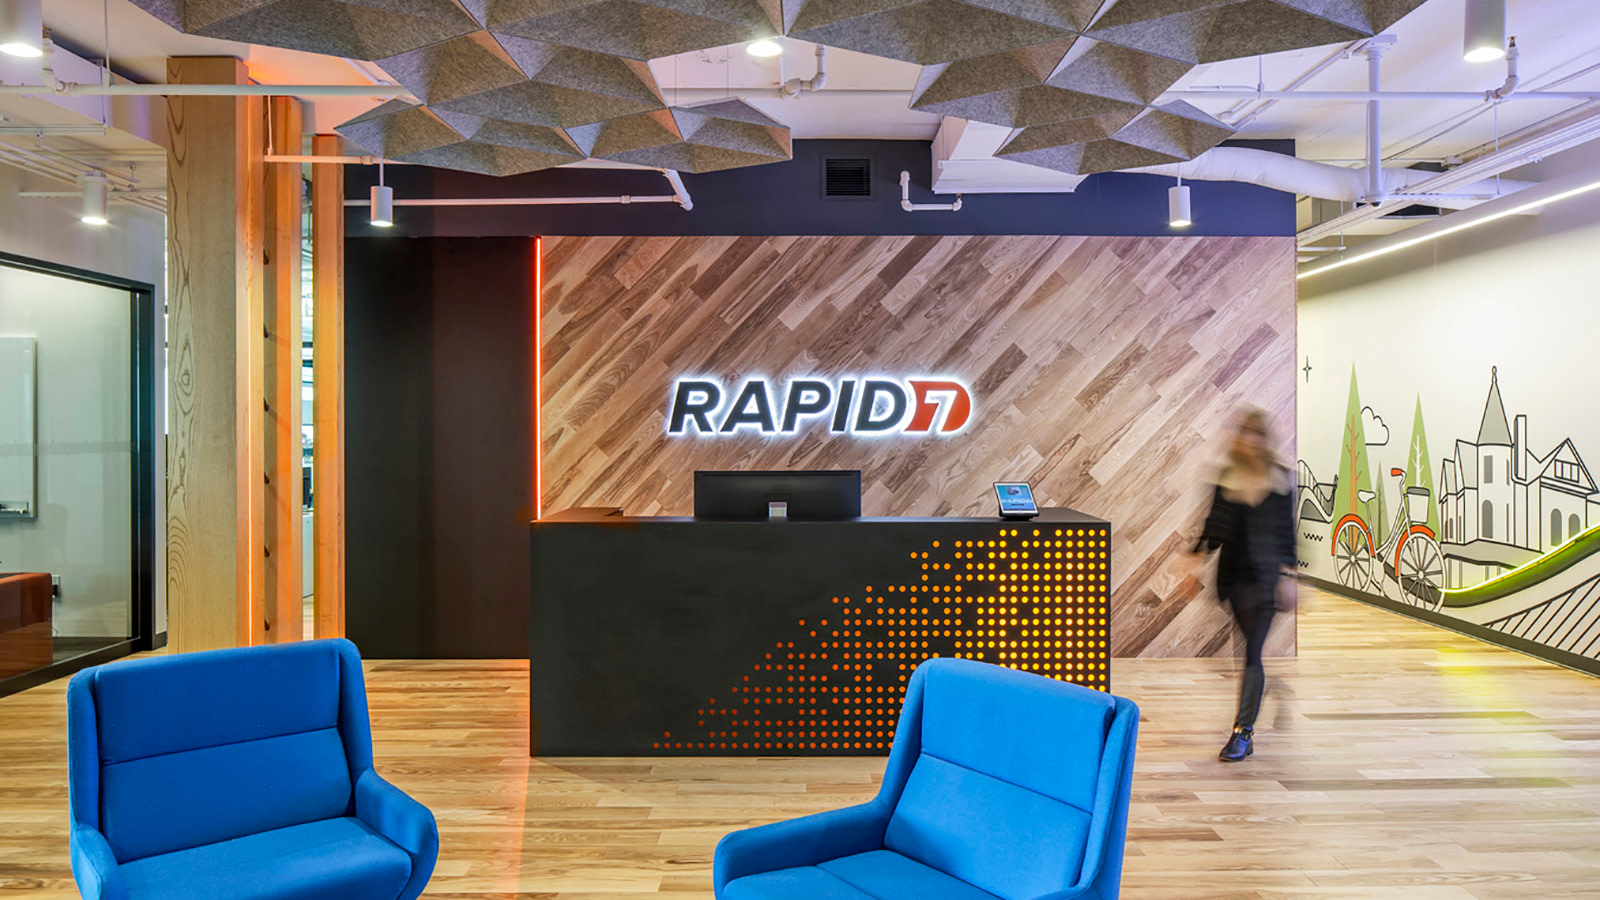 The reception area and lobby of Rapid7 Toronto